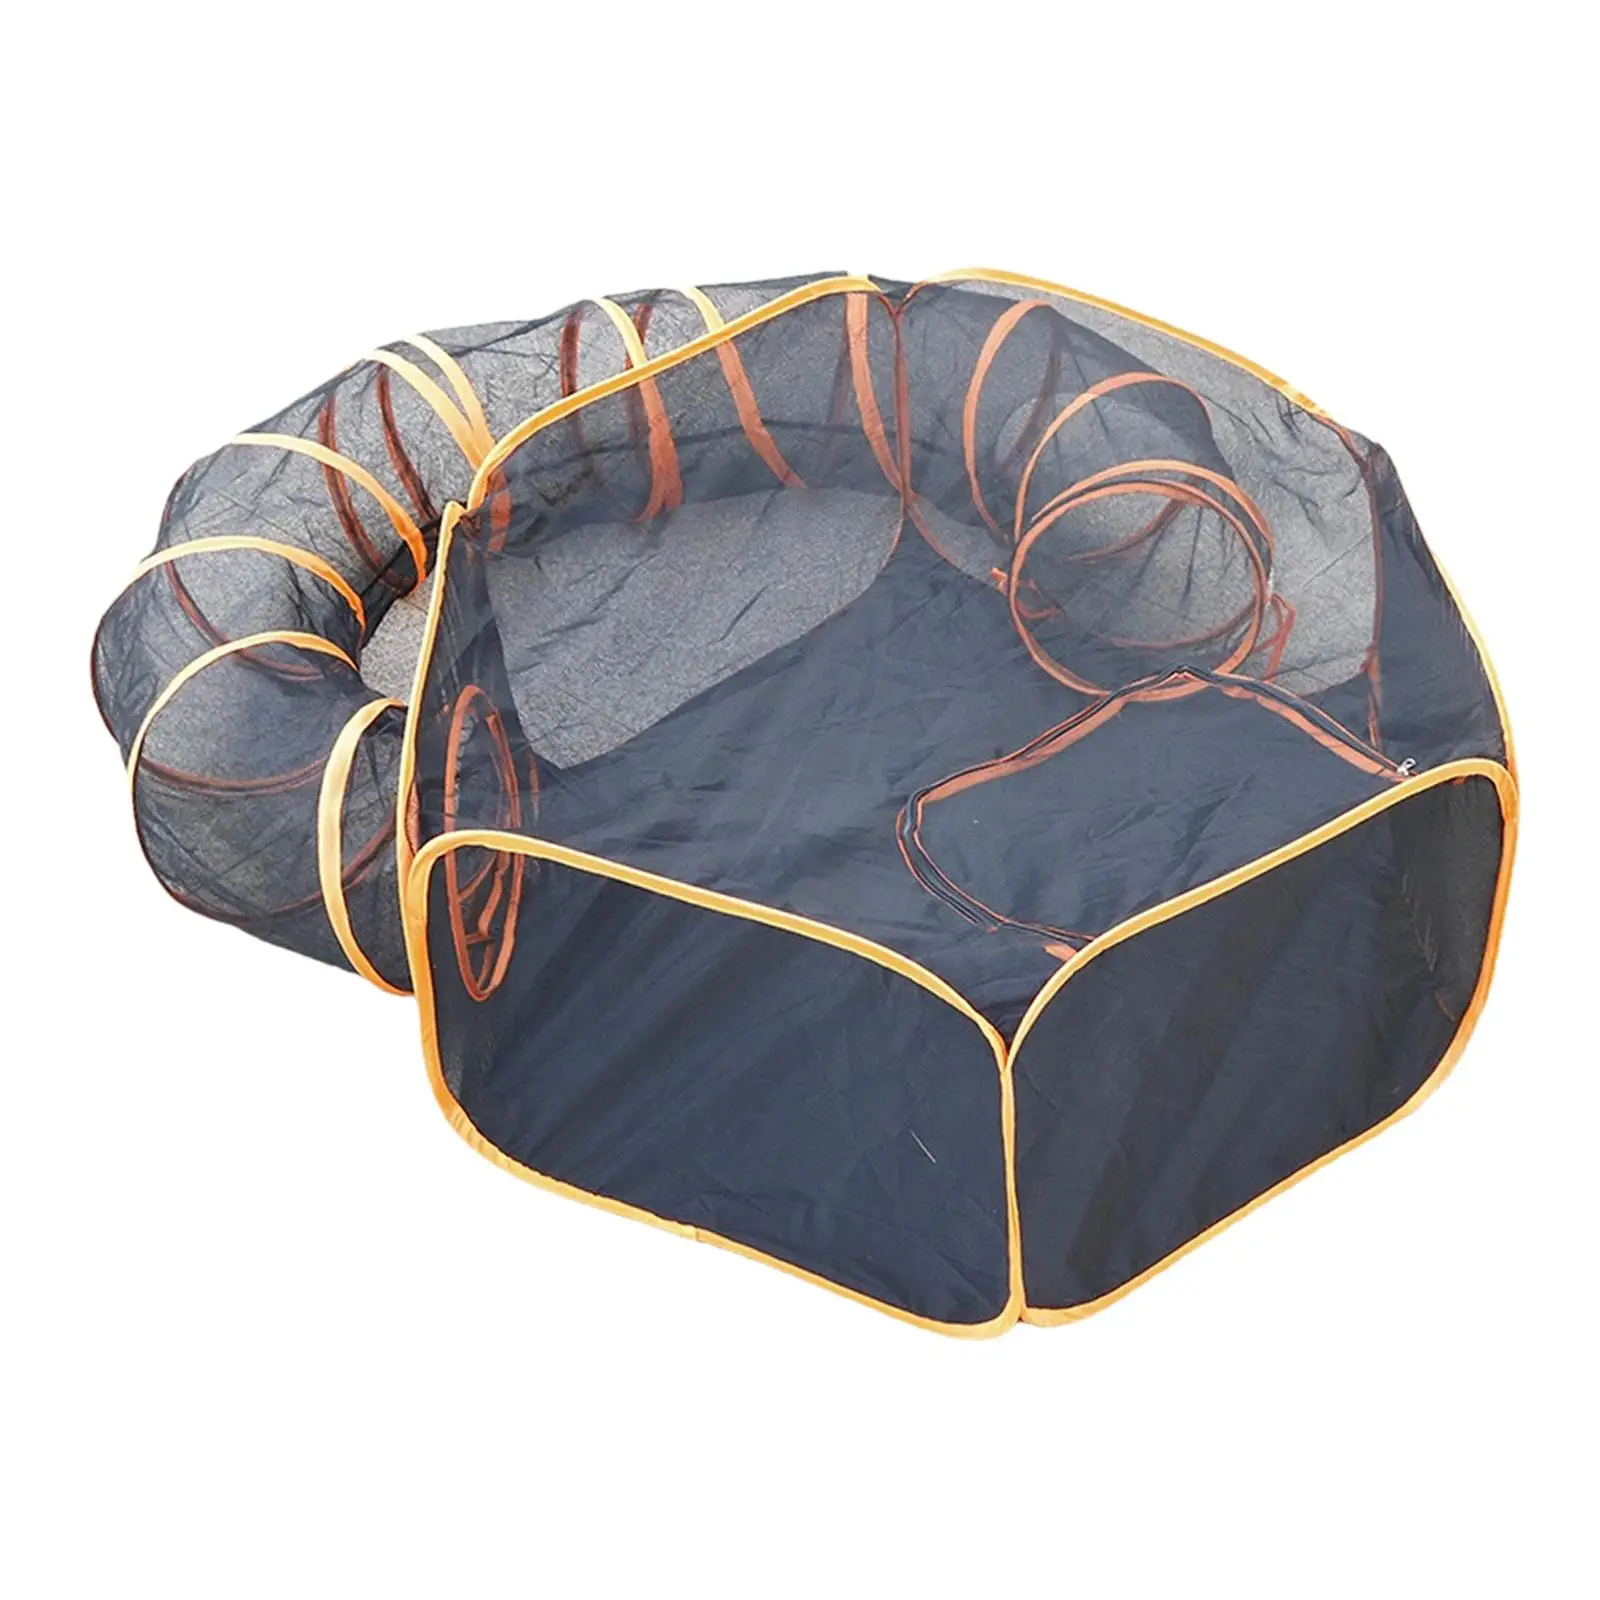 Cat Tunnel Indoor Cats Lightweight Cat Activity Center Cat Tunnel Tube Collapsible Play Tunnel Play Tunnels for Hamster